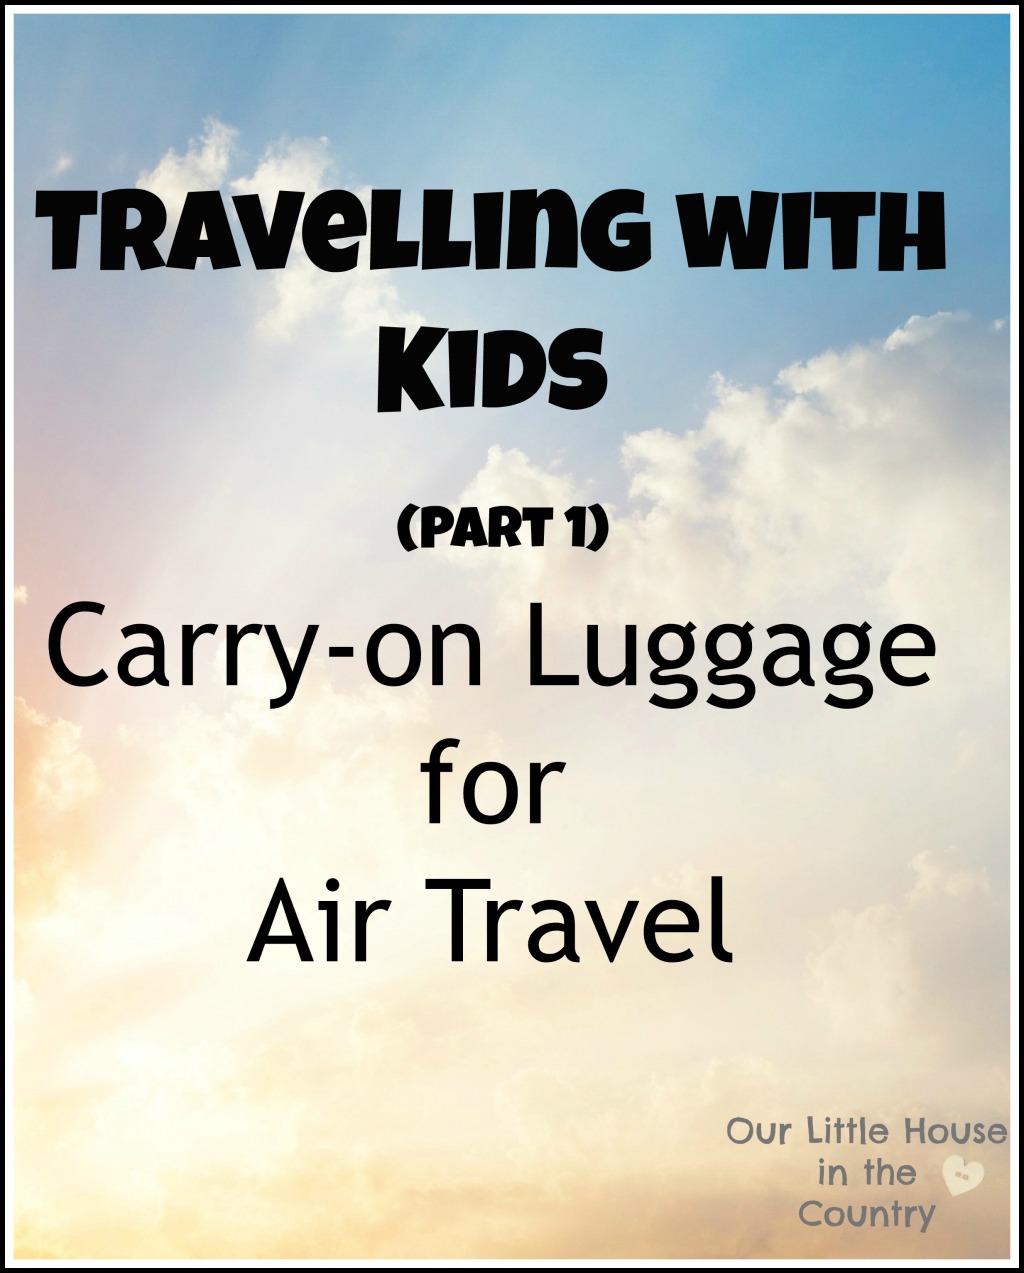 Travelling With Kids Part 1- Carry-on Luggage for Air Travel - Our Little House in the Country